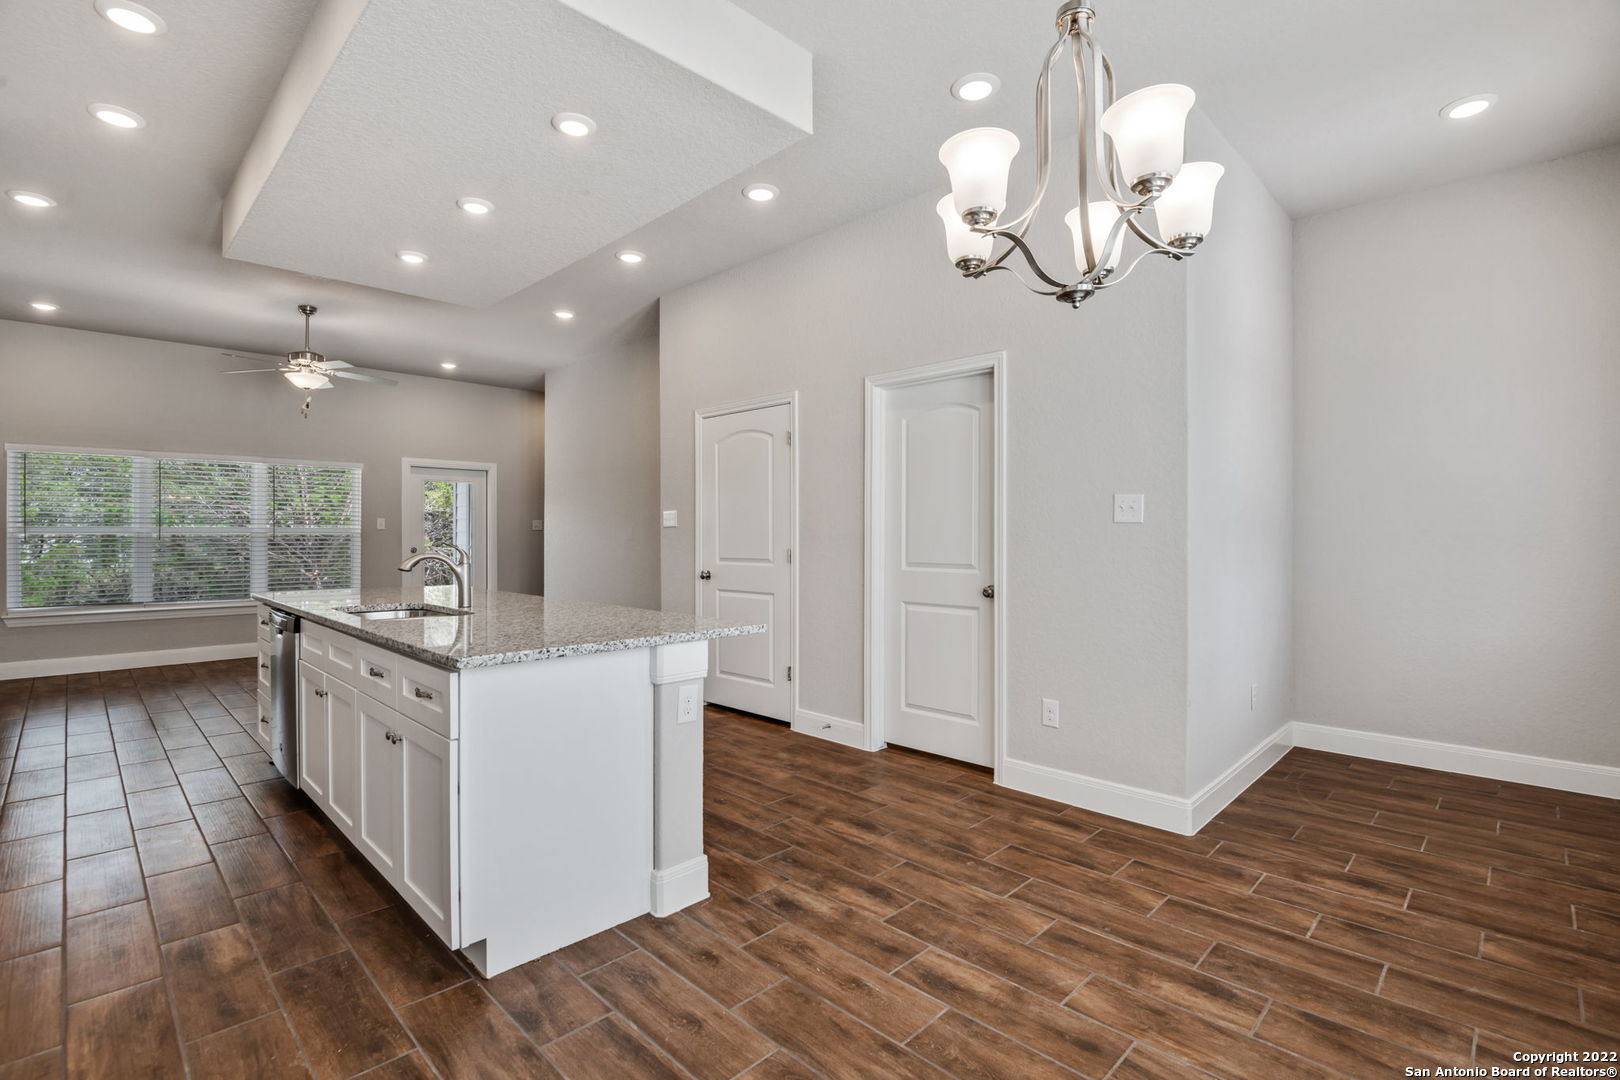 a kitchen with stainless steel appliances granite countertop white cabinets and wooden floor